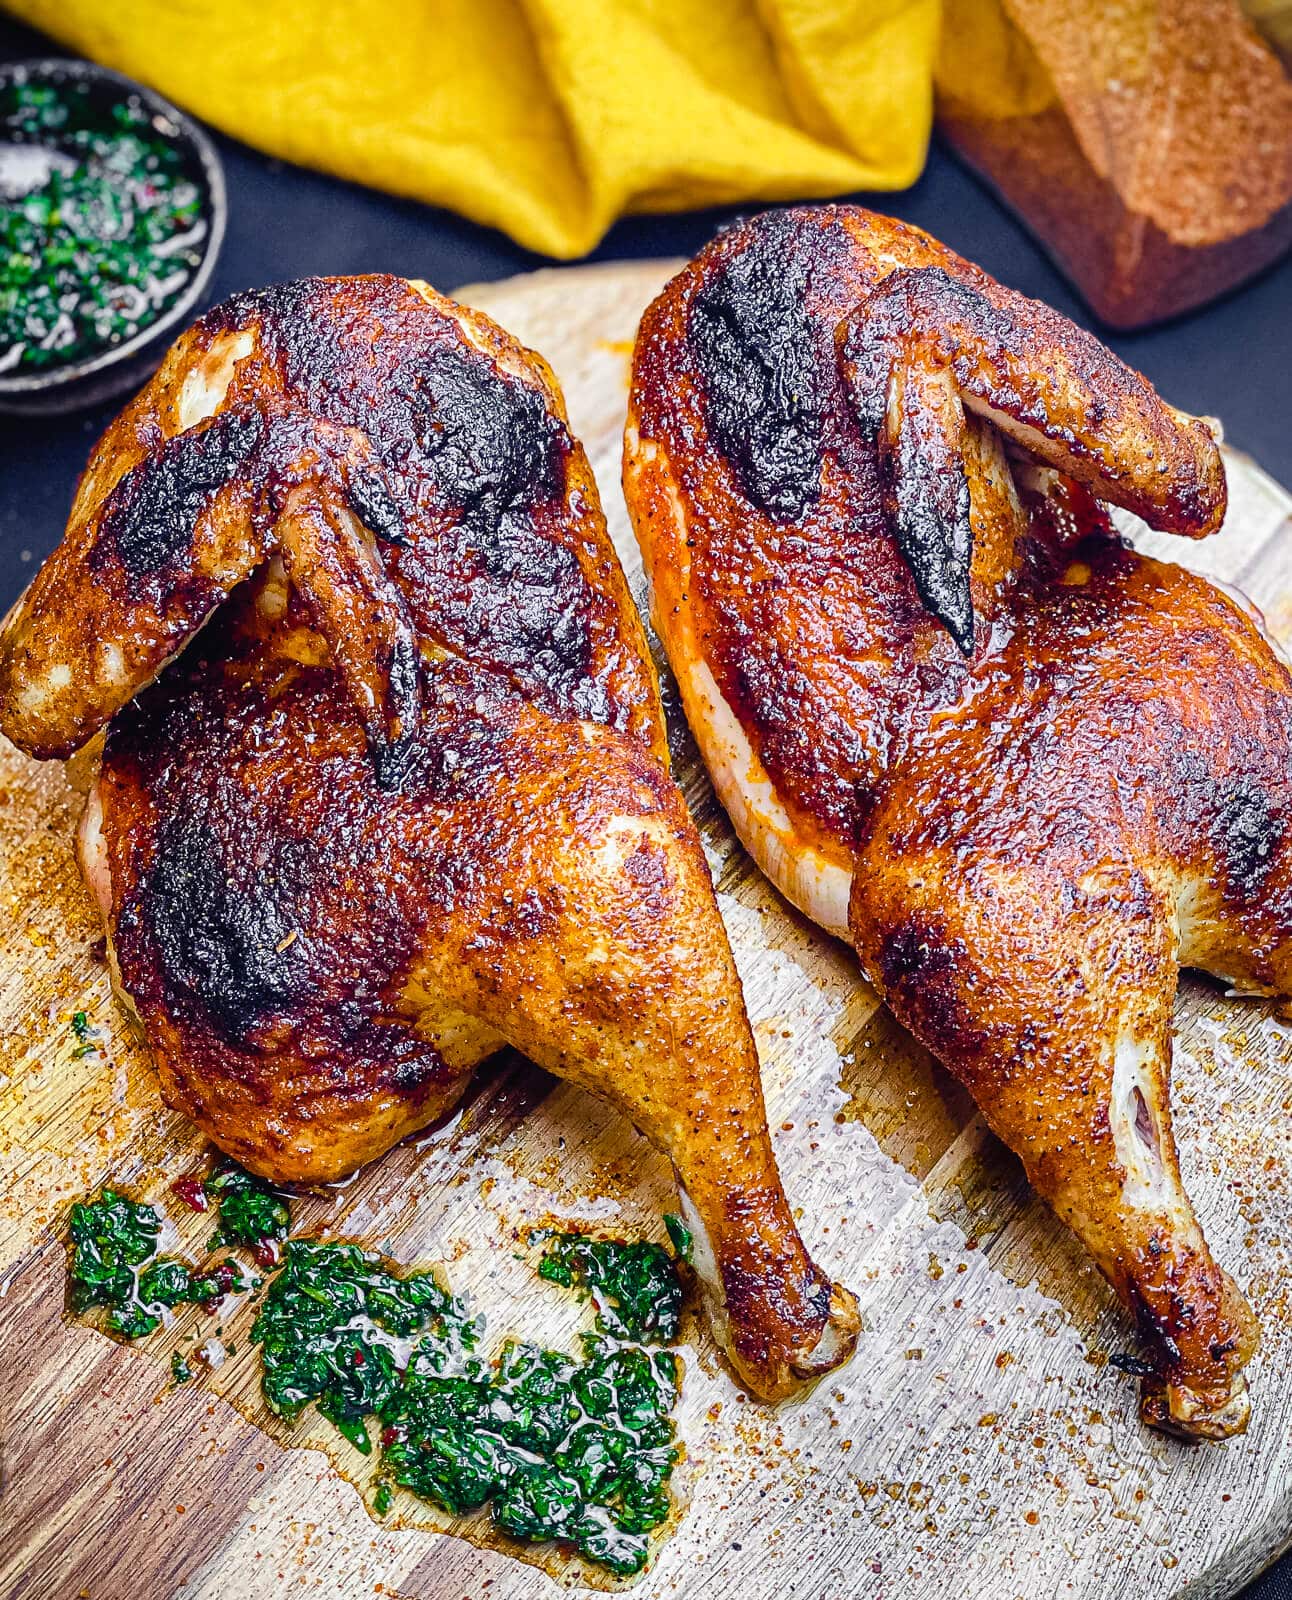 https://www.grillseeker.com/wp-content/uploads/2022/08/grilled-chicken-halves-with-chimichurri-on-cutting-board.jpg